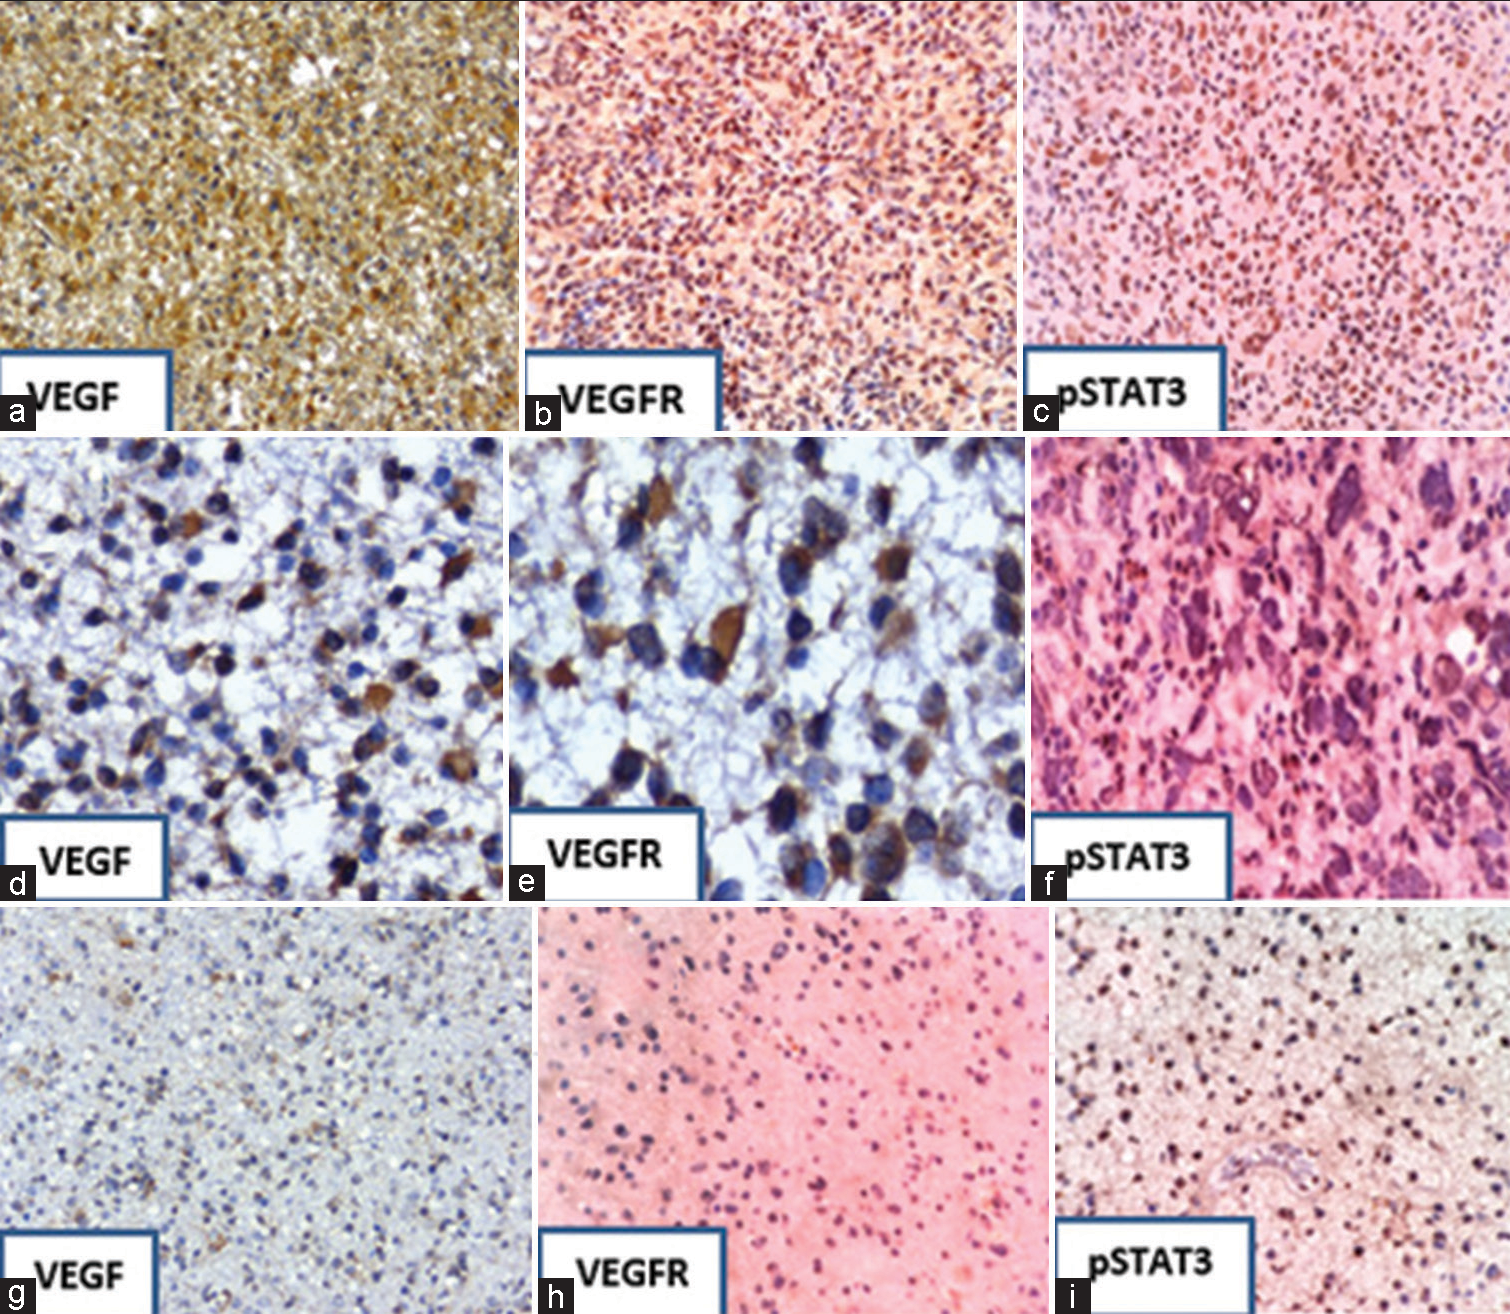 Immunohistochemical staining showing the expression of VEGF, VEFGR, and pSTAT3; Strong expression (a-c) in GBM (Grade IV) and from (d-f) moderate expression in anaplastic astrocytoma (Grade III). From (g-i), there is a weak expression of markers in diffuse astrocytoma (Grade II). Immunostaining is also seen in endothelial cells (f and i). Magnification ×200. VEGF: Vascular endothelial growth factor, VEGFR: Vascular endothelial growth factor receptor, and pSTAT3: Phosphorylated signal transducer and activator of transcription factor 3.